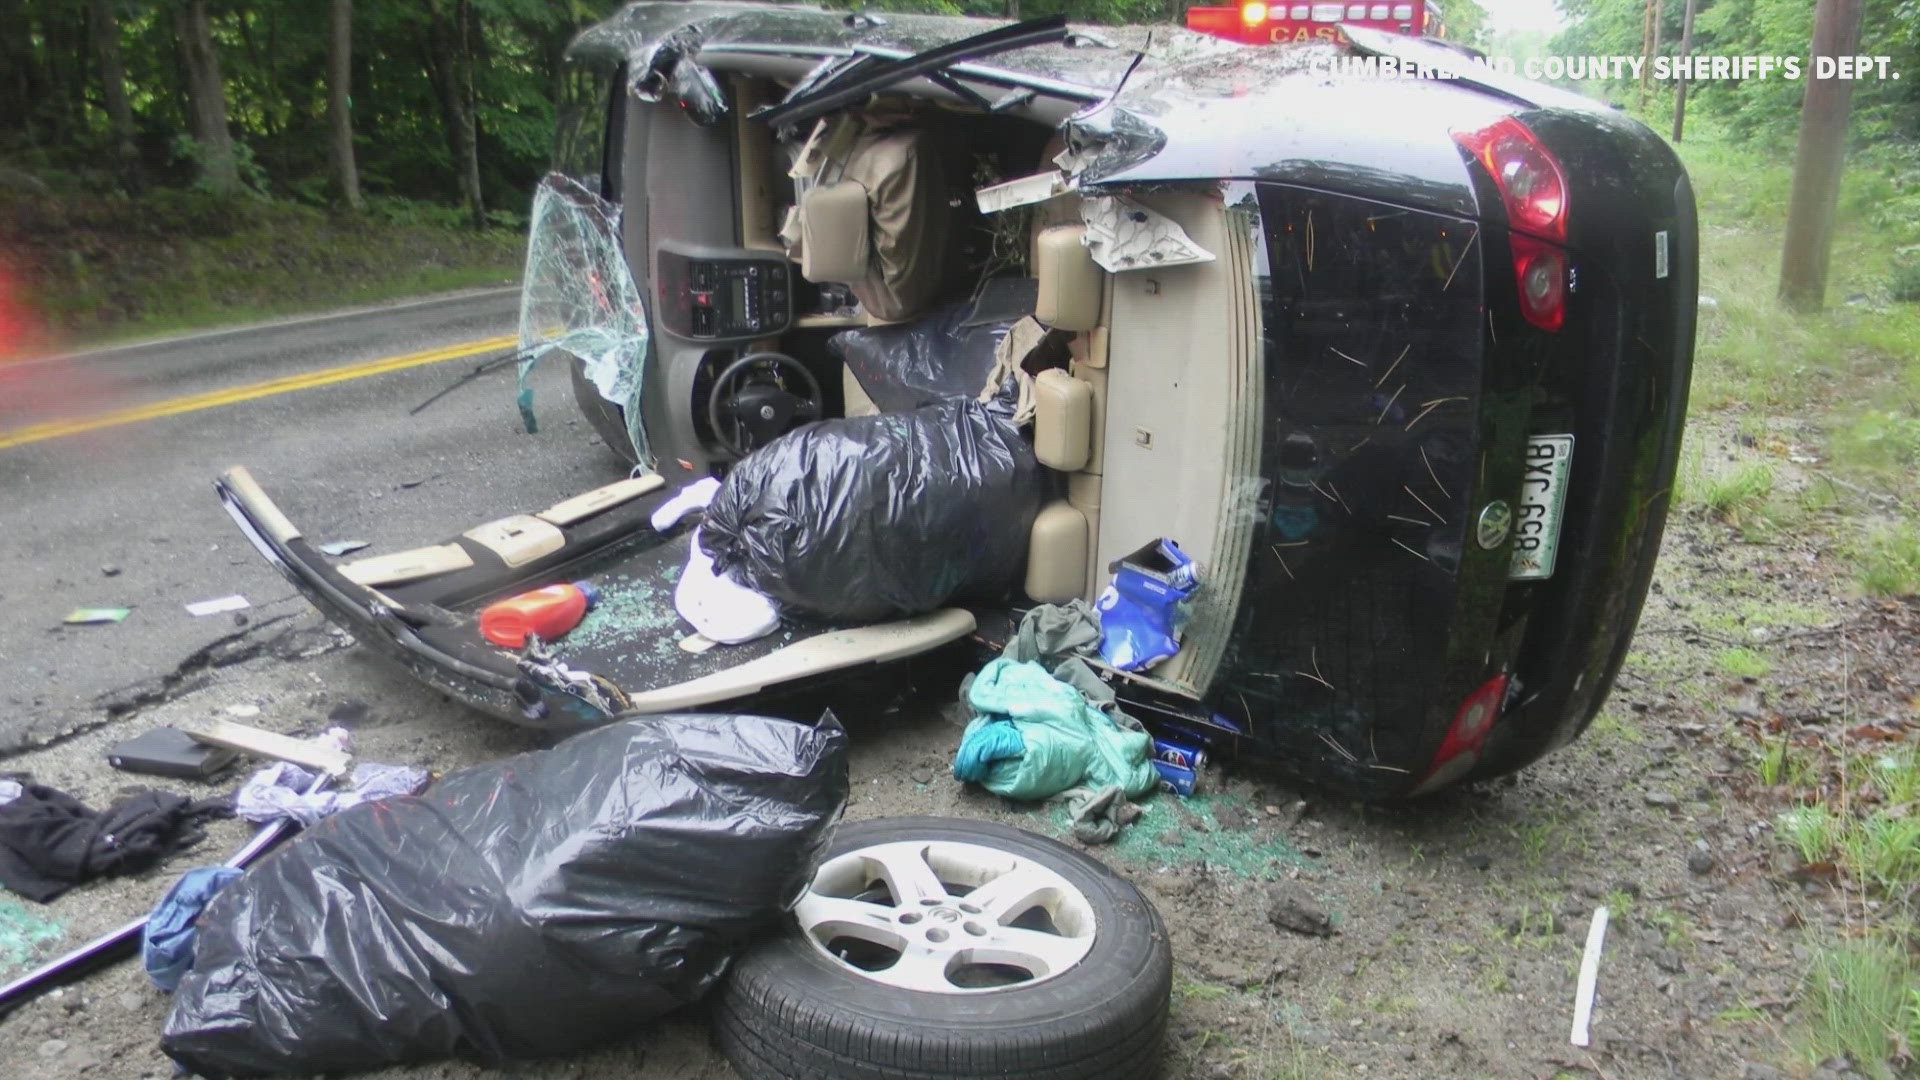 A 60-year-old Norway woman was injured after her vehicle rolled several times following a mechanical malfunction, the Cumberland County Sheriff's Office said.